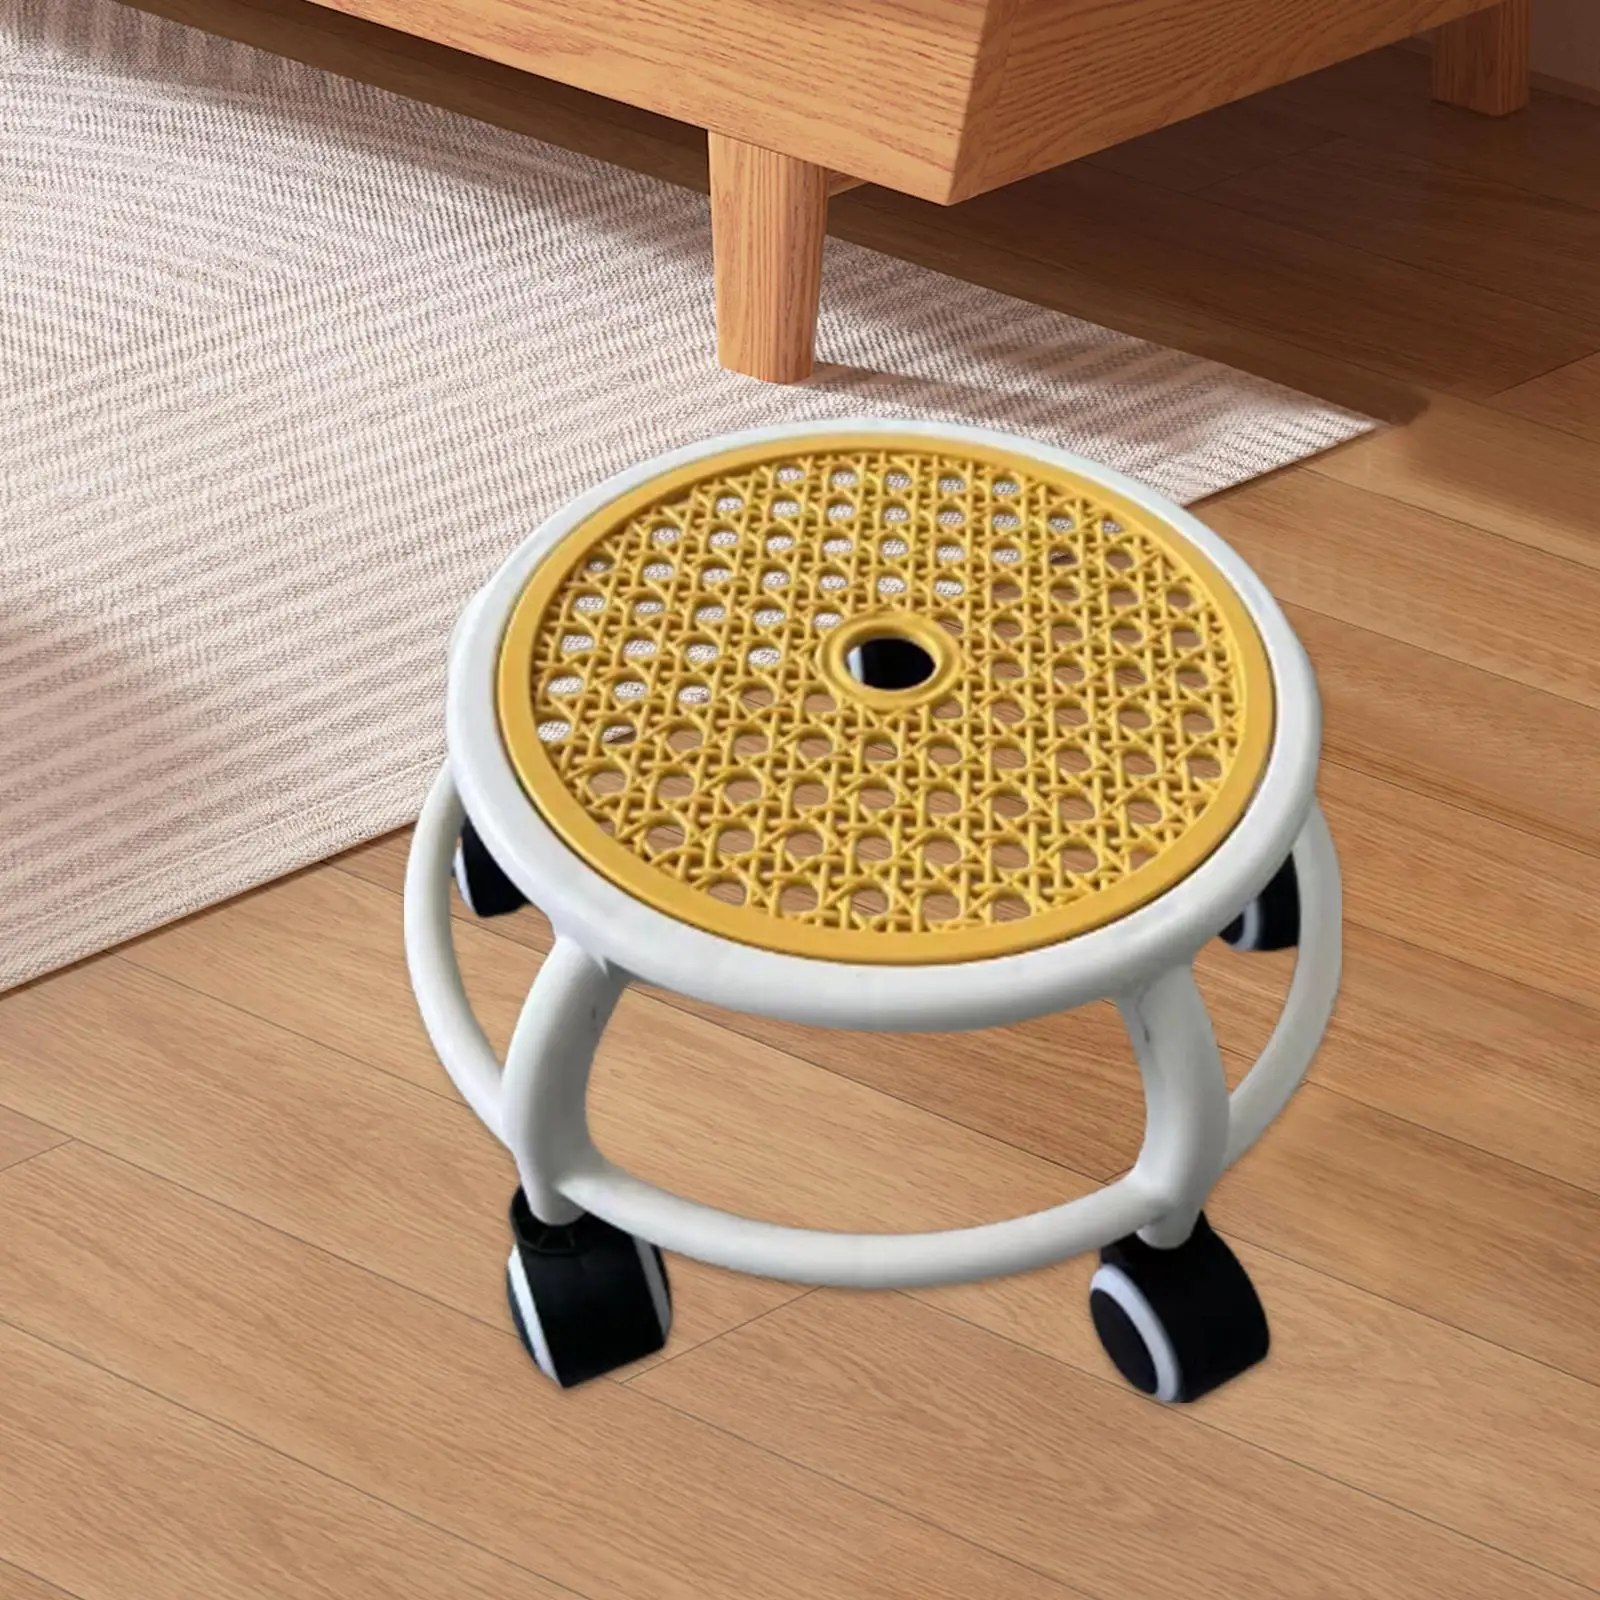 360° Rotating Roller Stool Small Heavy Duty Multiuse Shoe Changing Stool Seat for Library Salons Kids and Adult Home Barber Shop